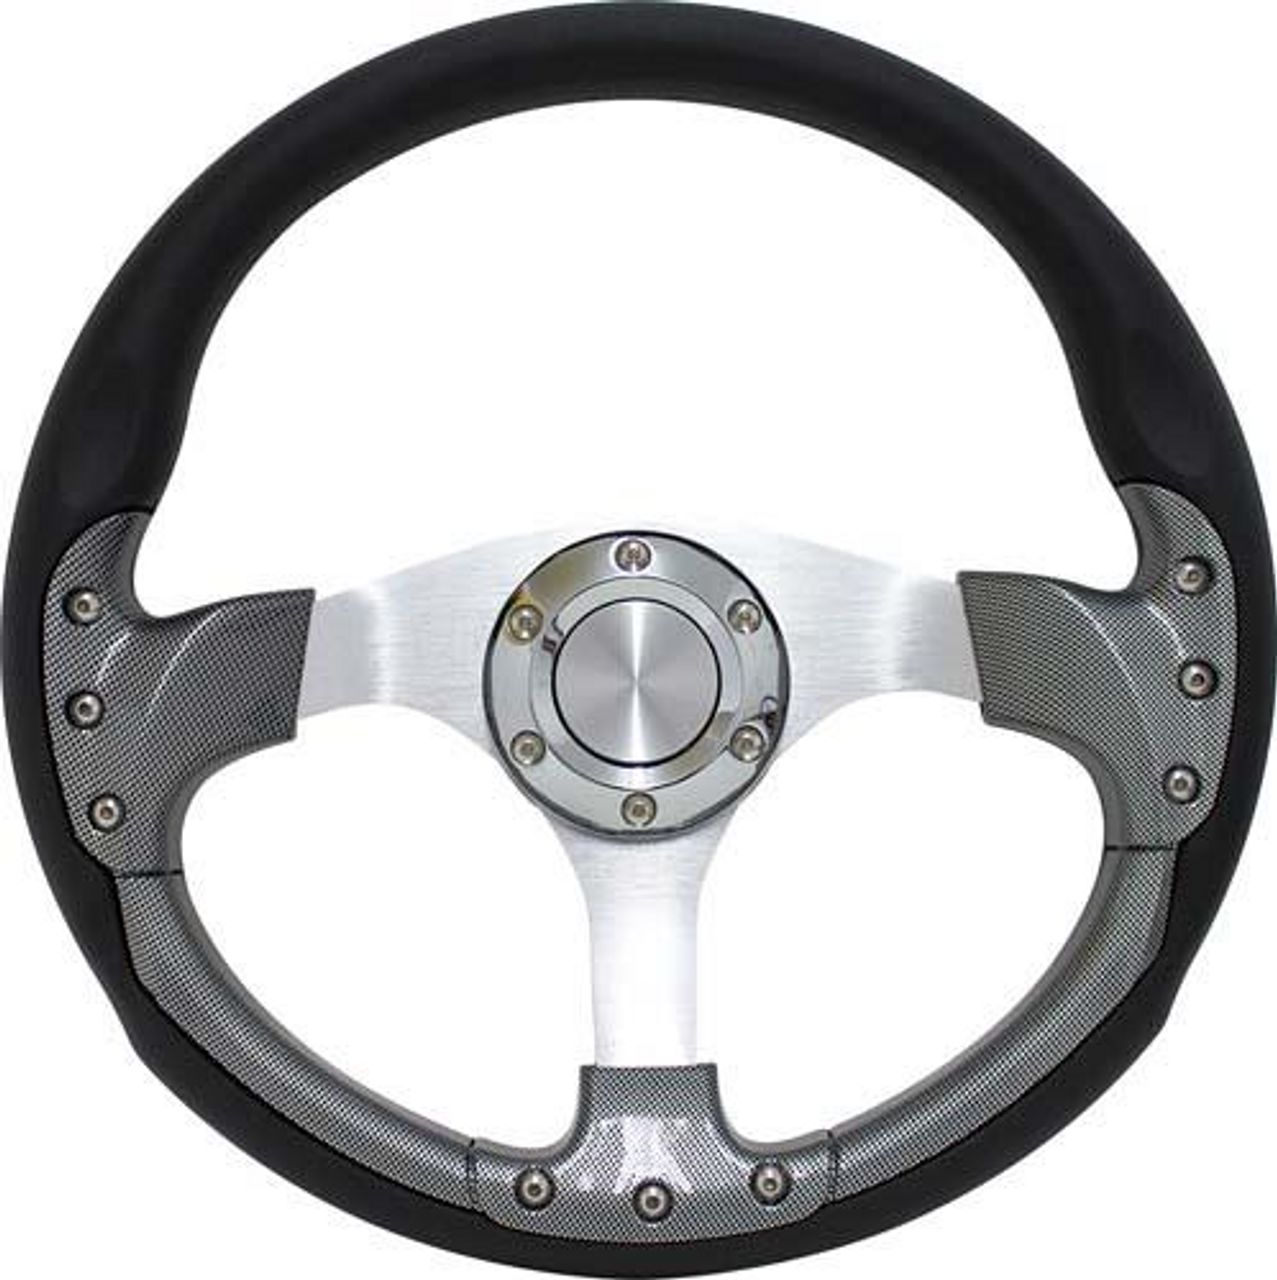 14" Pursuit Steering Wheel Kit with Chrome Adapter - Club Car Precedent 2004-Up, 53756